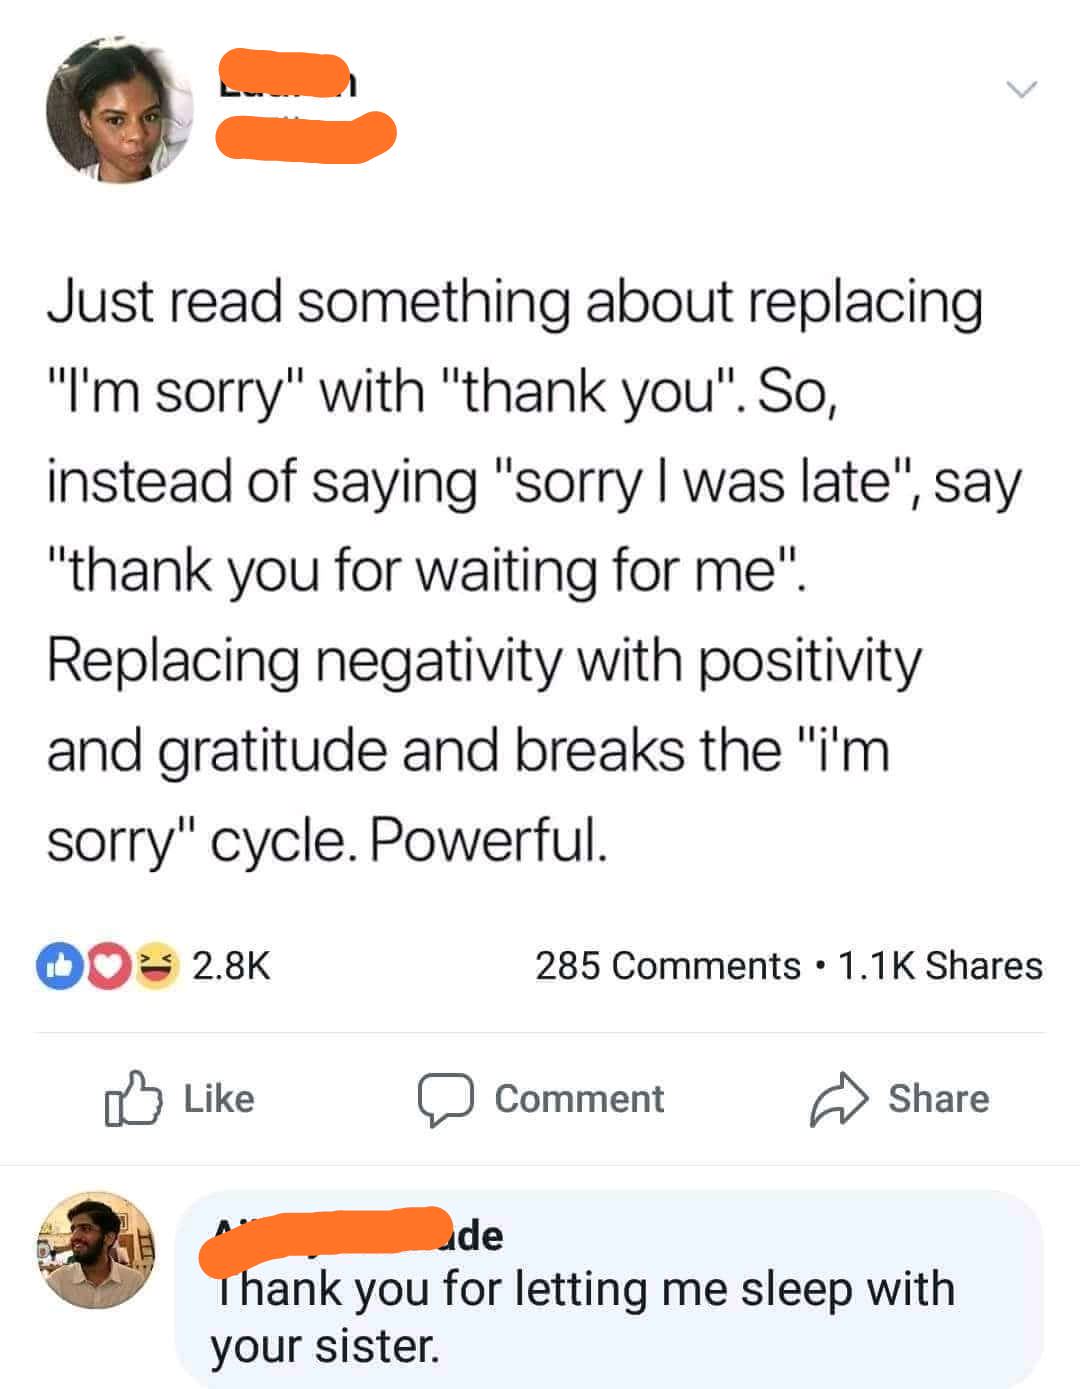 document - Just read something about replacing "I'm sorry" with "thank you". So, instead of saying "sorry I was late", say "thank you for waiting for me". Replacing negativity with positivity and gratitude and breaks the "i'm sorry" cycle. Powerful. 00% 2